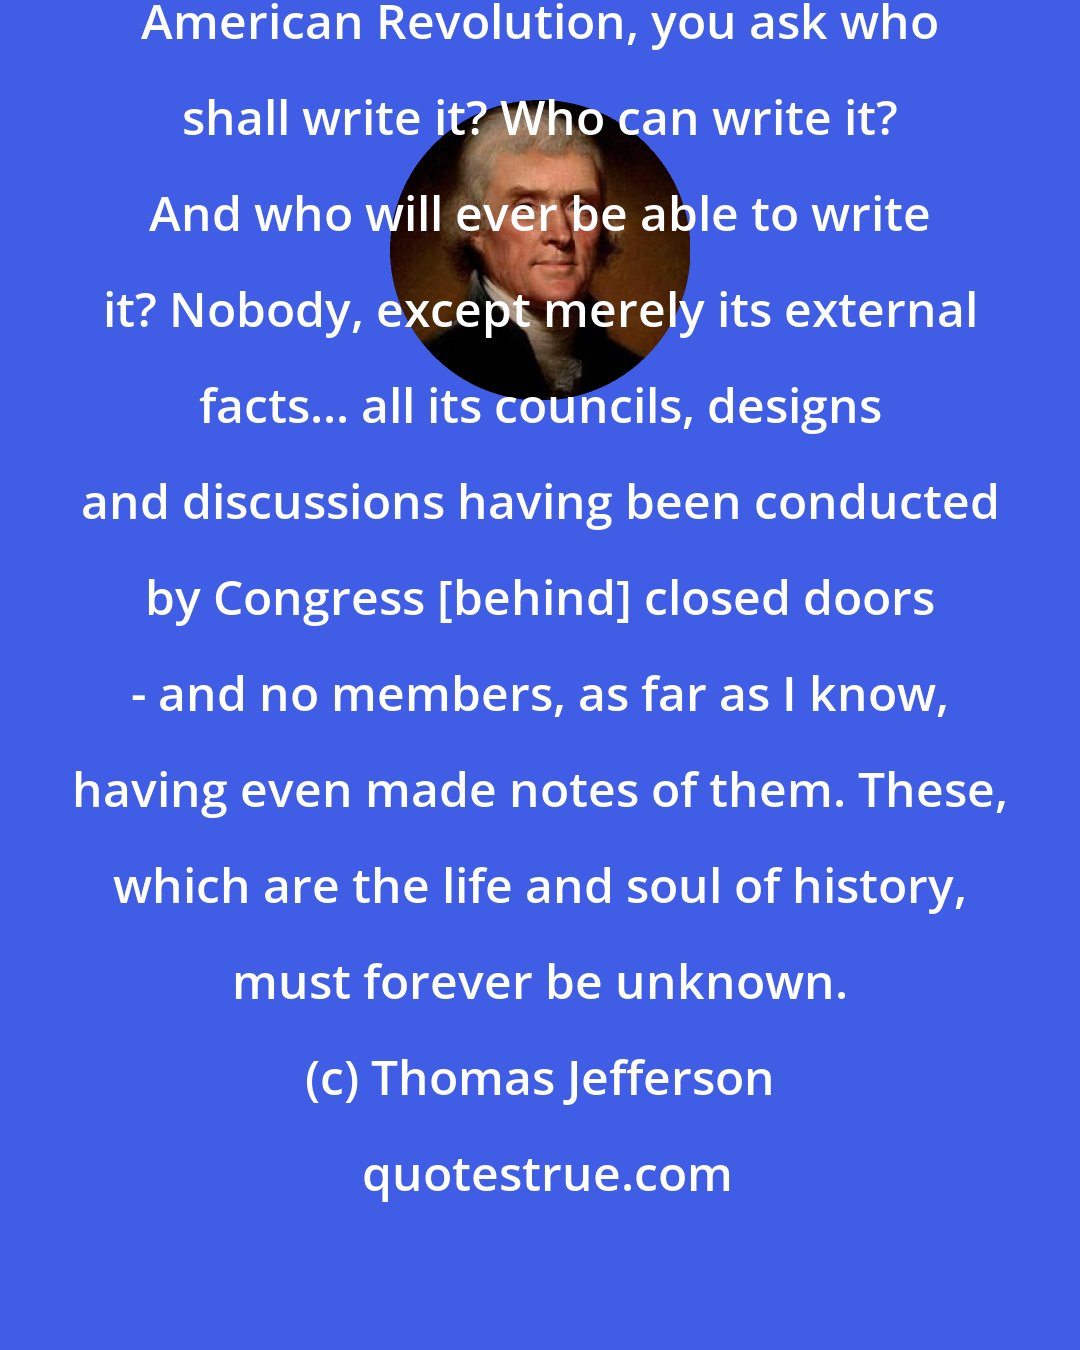 Thomas Jefferson: On the subject of the history of the American Revolution, you ask who shall write it? Who can write it? And who will ever be able to write it? Nobody, except merely its external facts... all its councils, designs and discussions having been conducted by Congress [behind] closed doors - and no members, as far as I know, having even made notes of them. These, which are the life and soul of history, must forever be unknown.